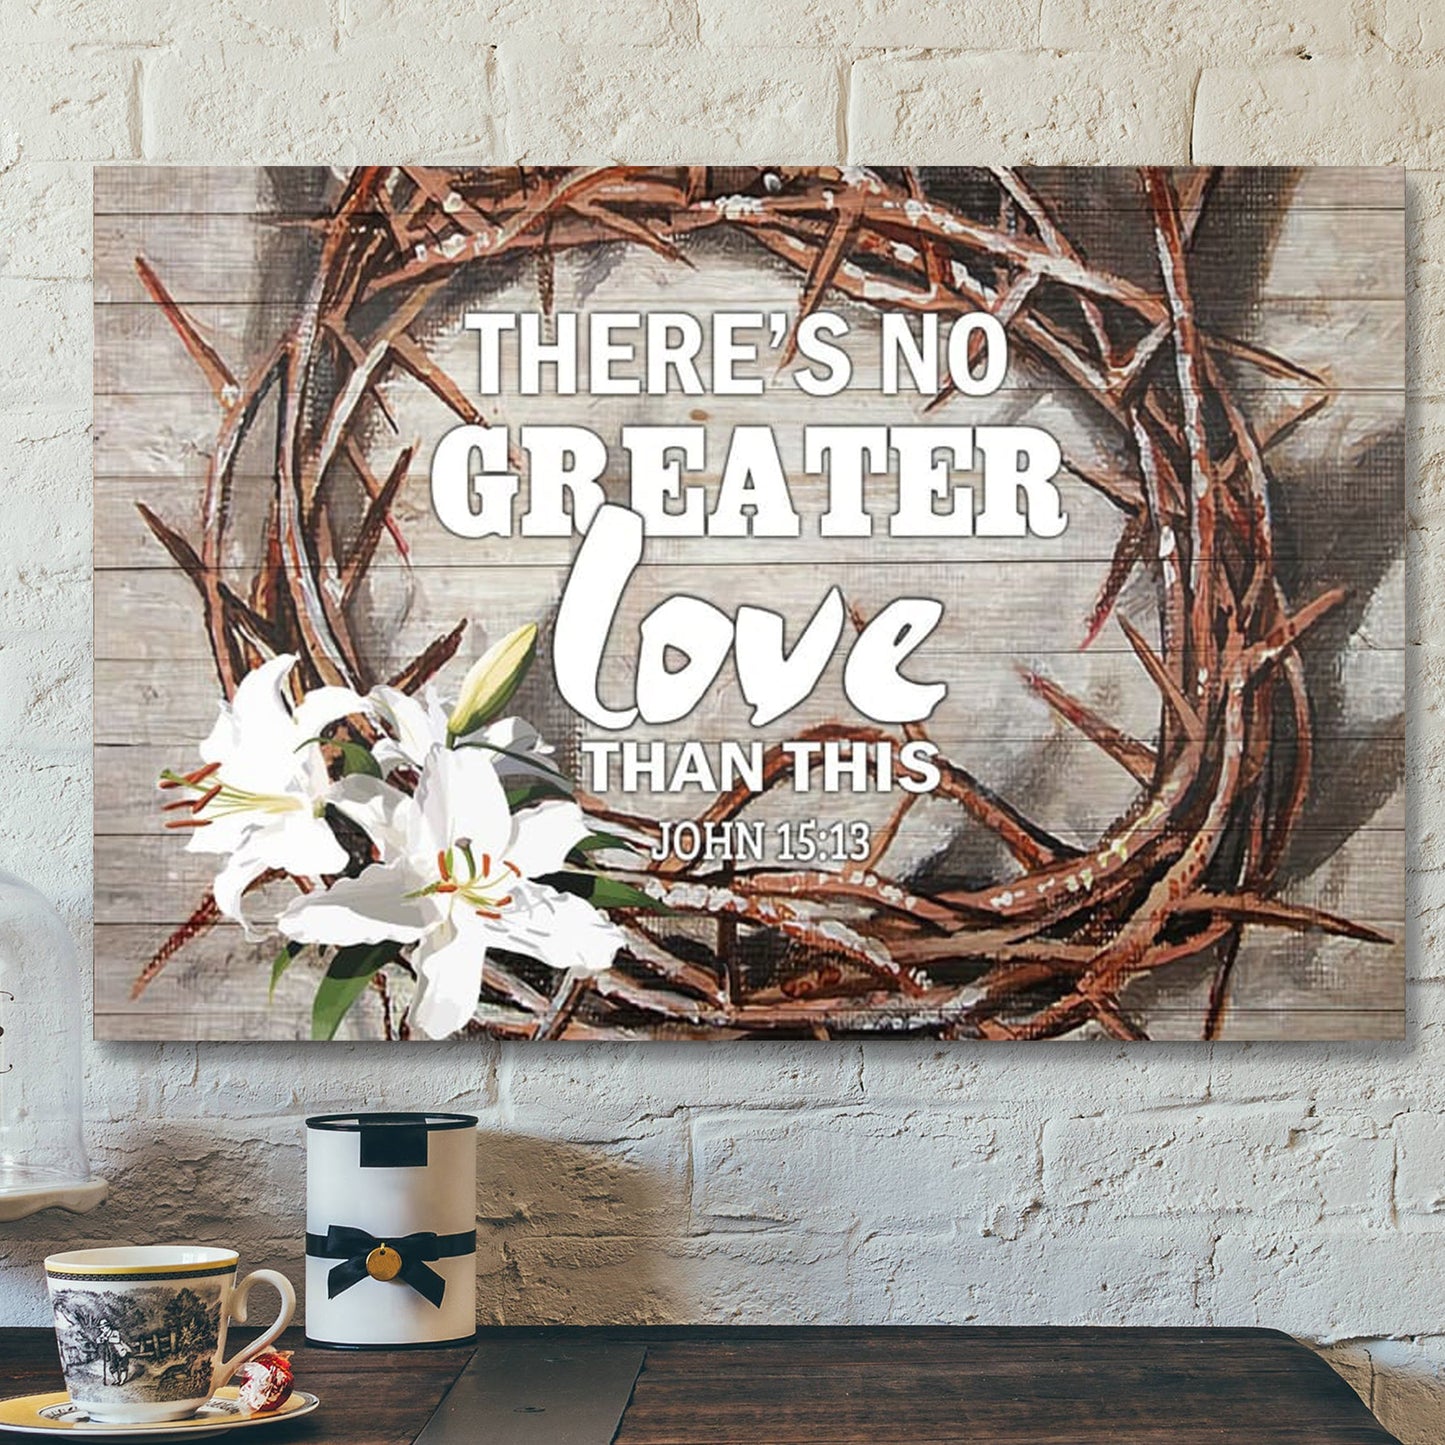 Bible Verse Canvas - There Is No Greater Love Than This John 1513 Canvas - Scripture Canvas Wall Art - Ciaocustom